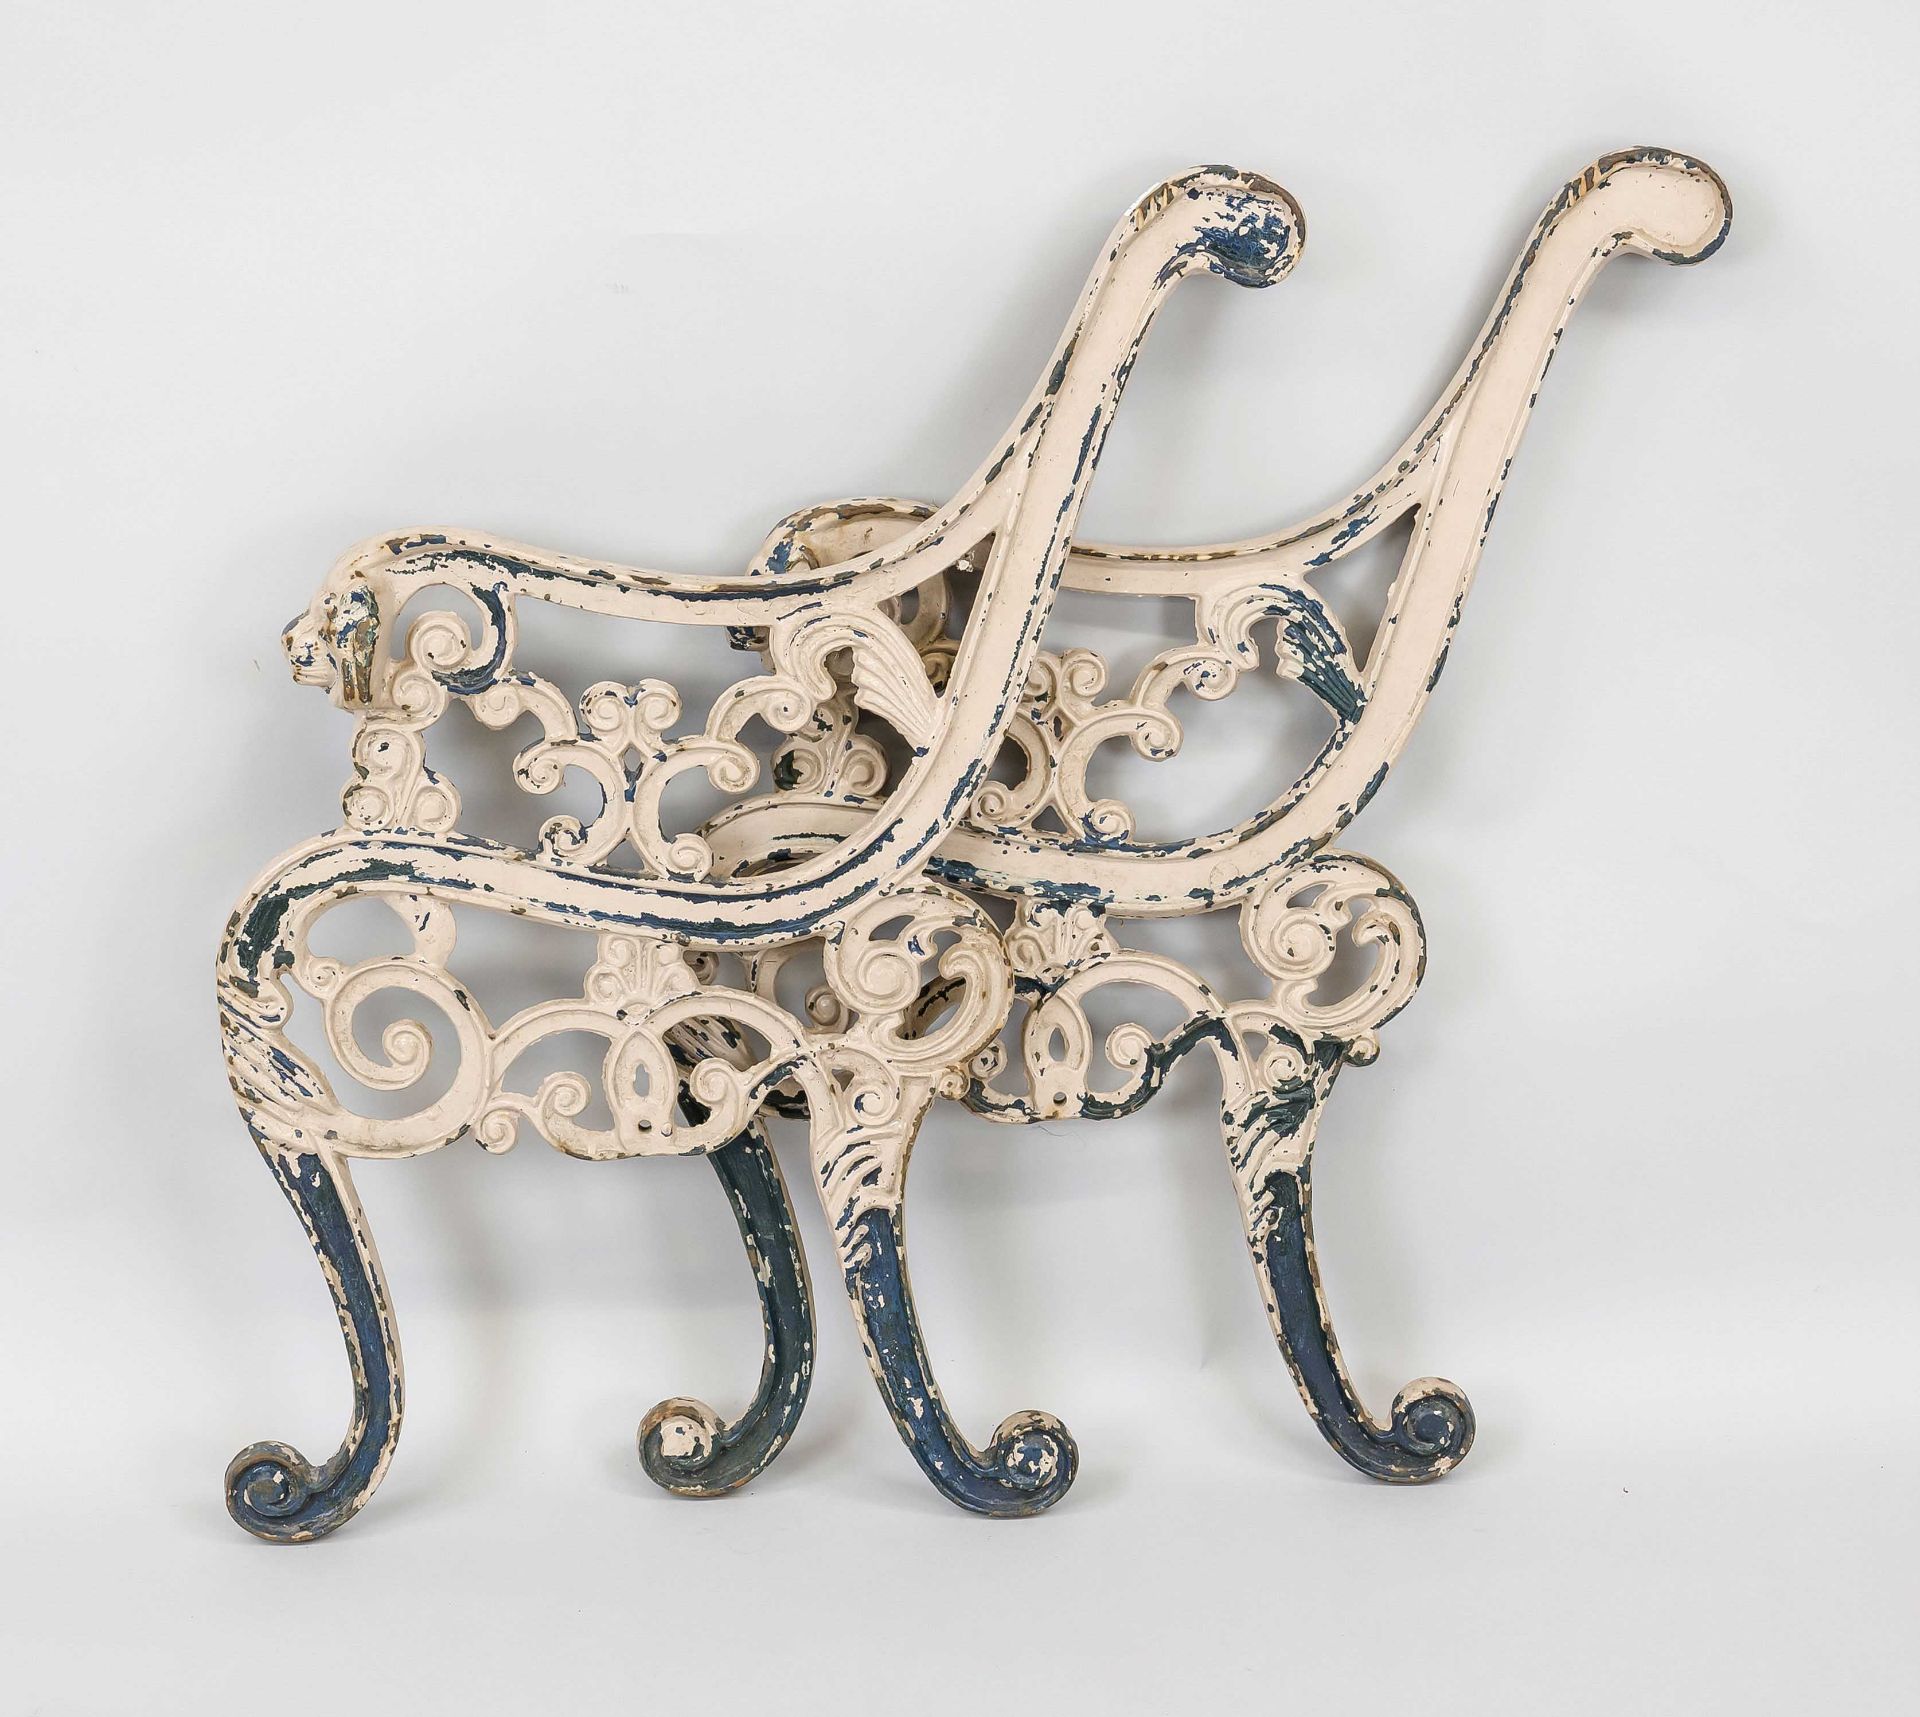 Frame for a garden bench, 20th century, cast iron, painted blue and powder-colored in several